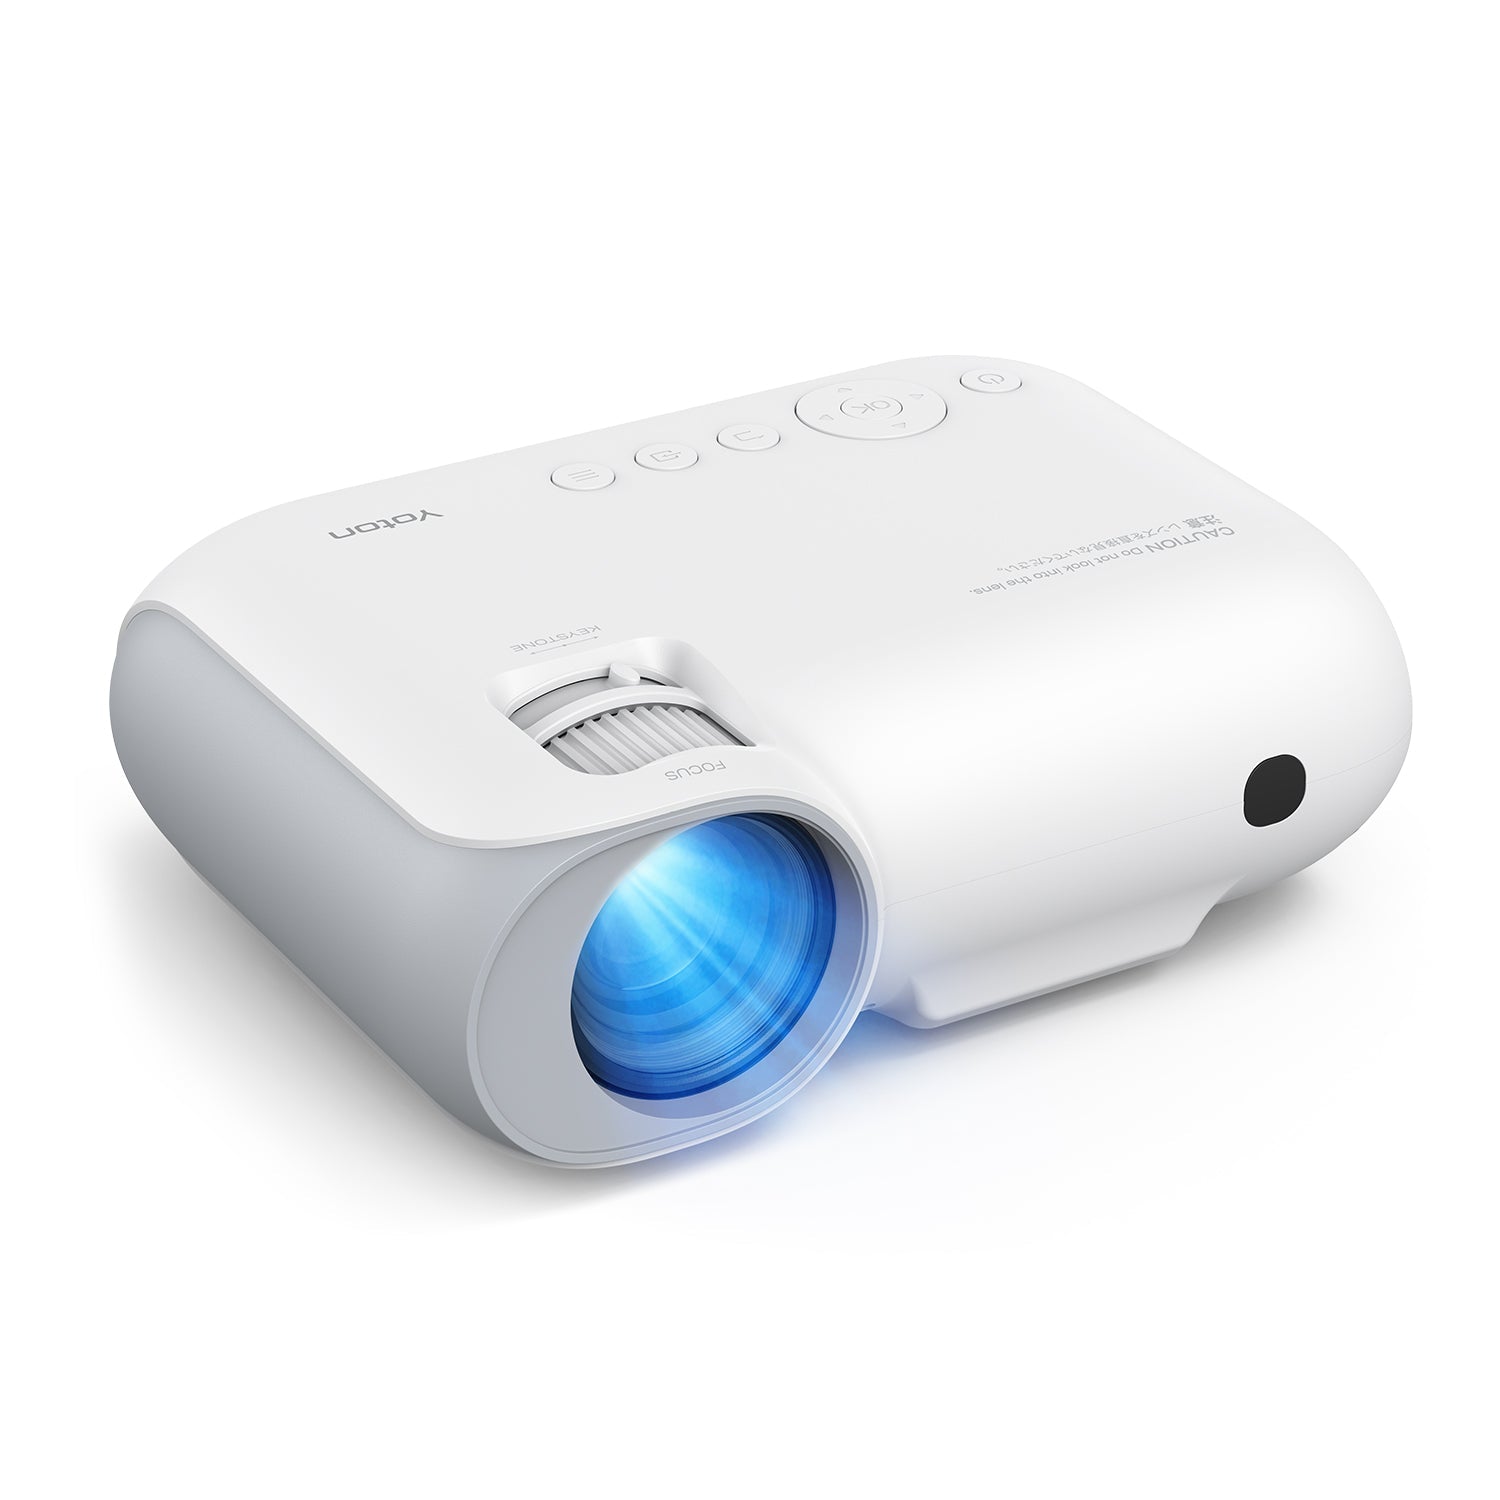 Yoton Y7 Mini projector 4k Supported Full HD 1080P